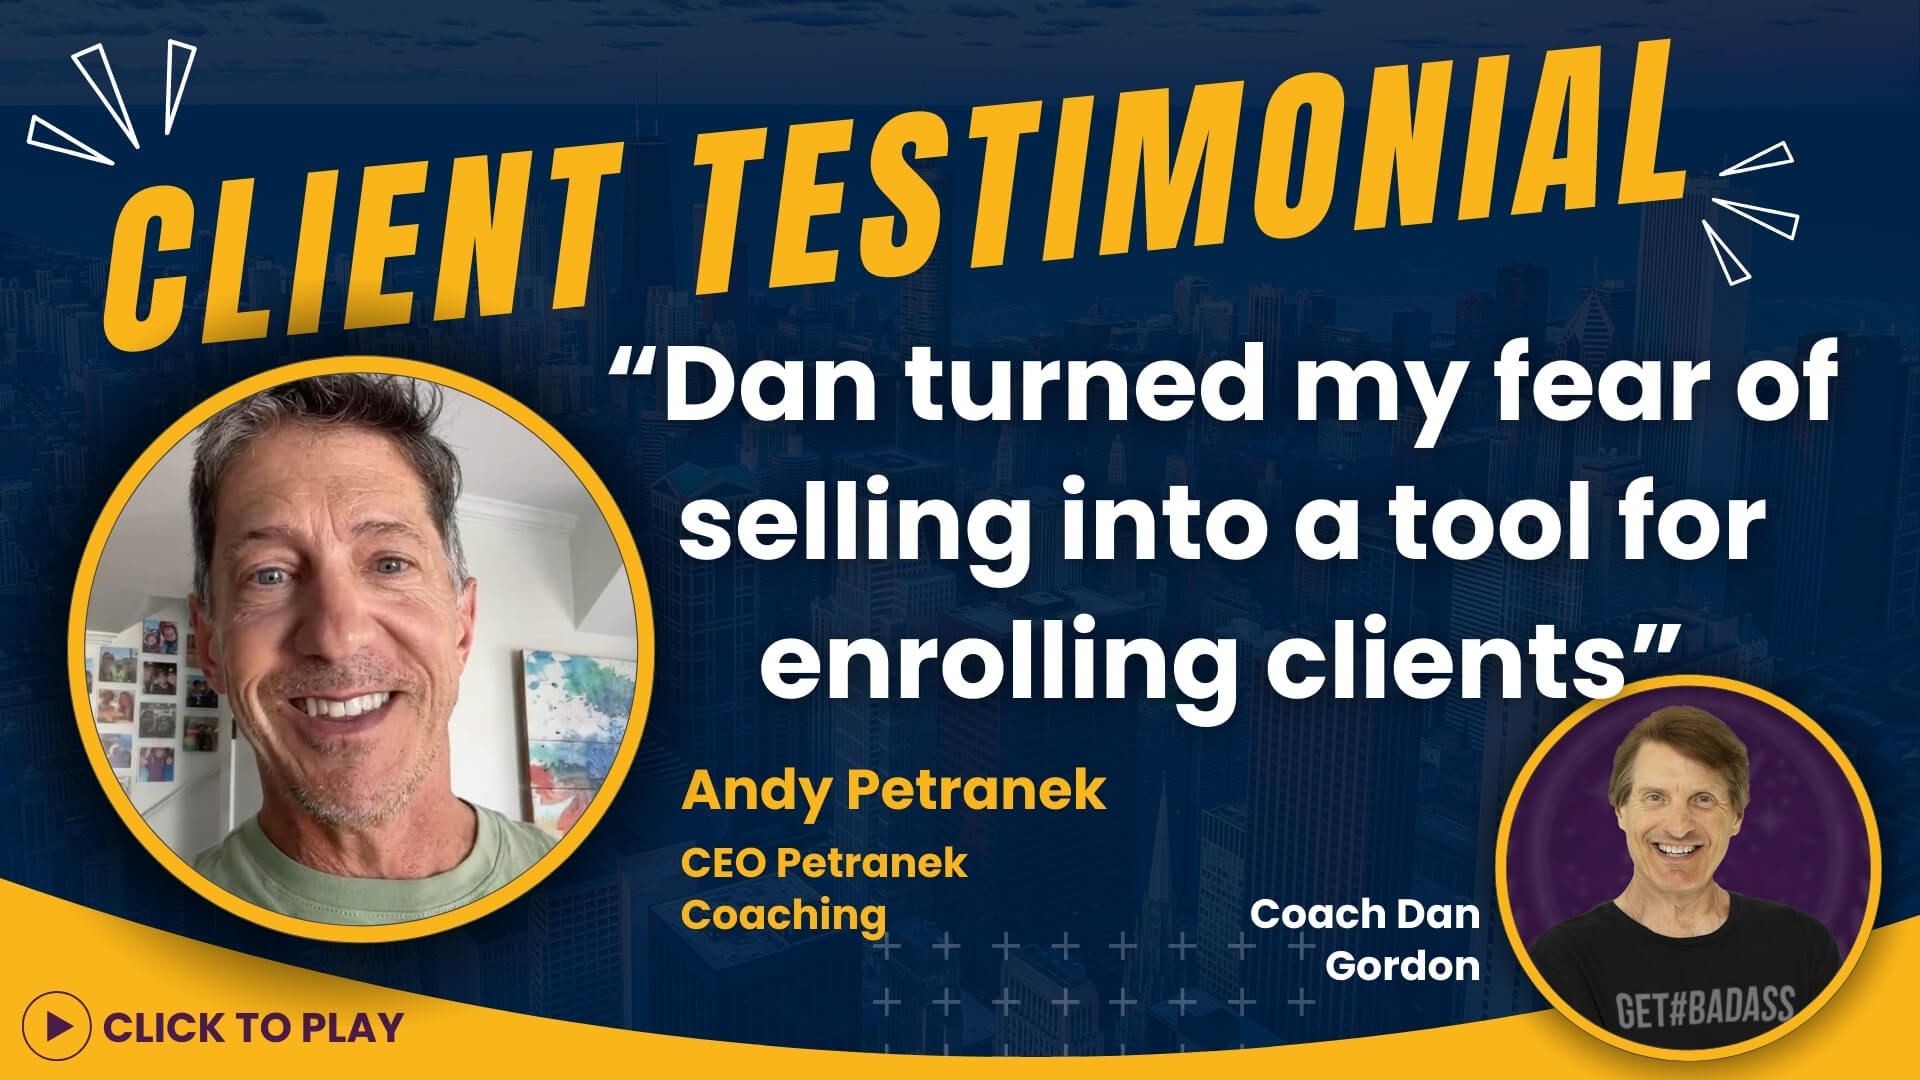 Life Coach Andy Petranek gives a testimonial on how Coach Dan Gordon transformed his approach to sales, with an inviting 'Click to Play' button for the video.